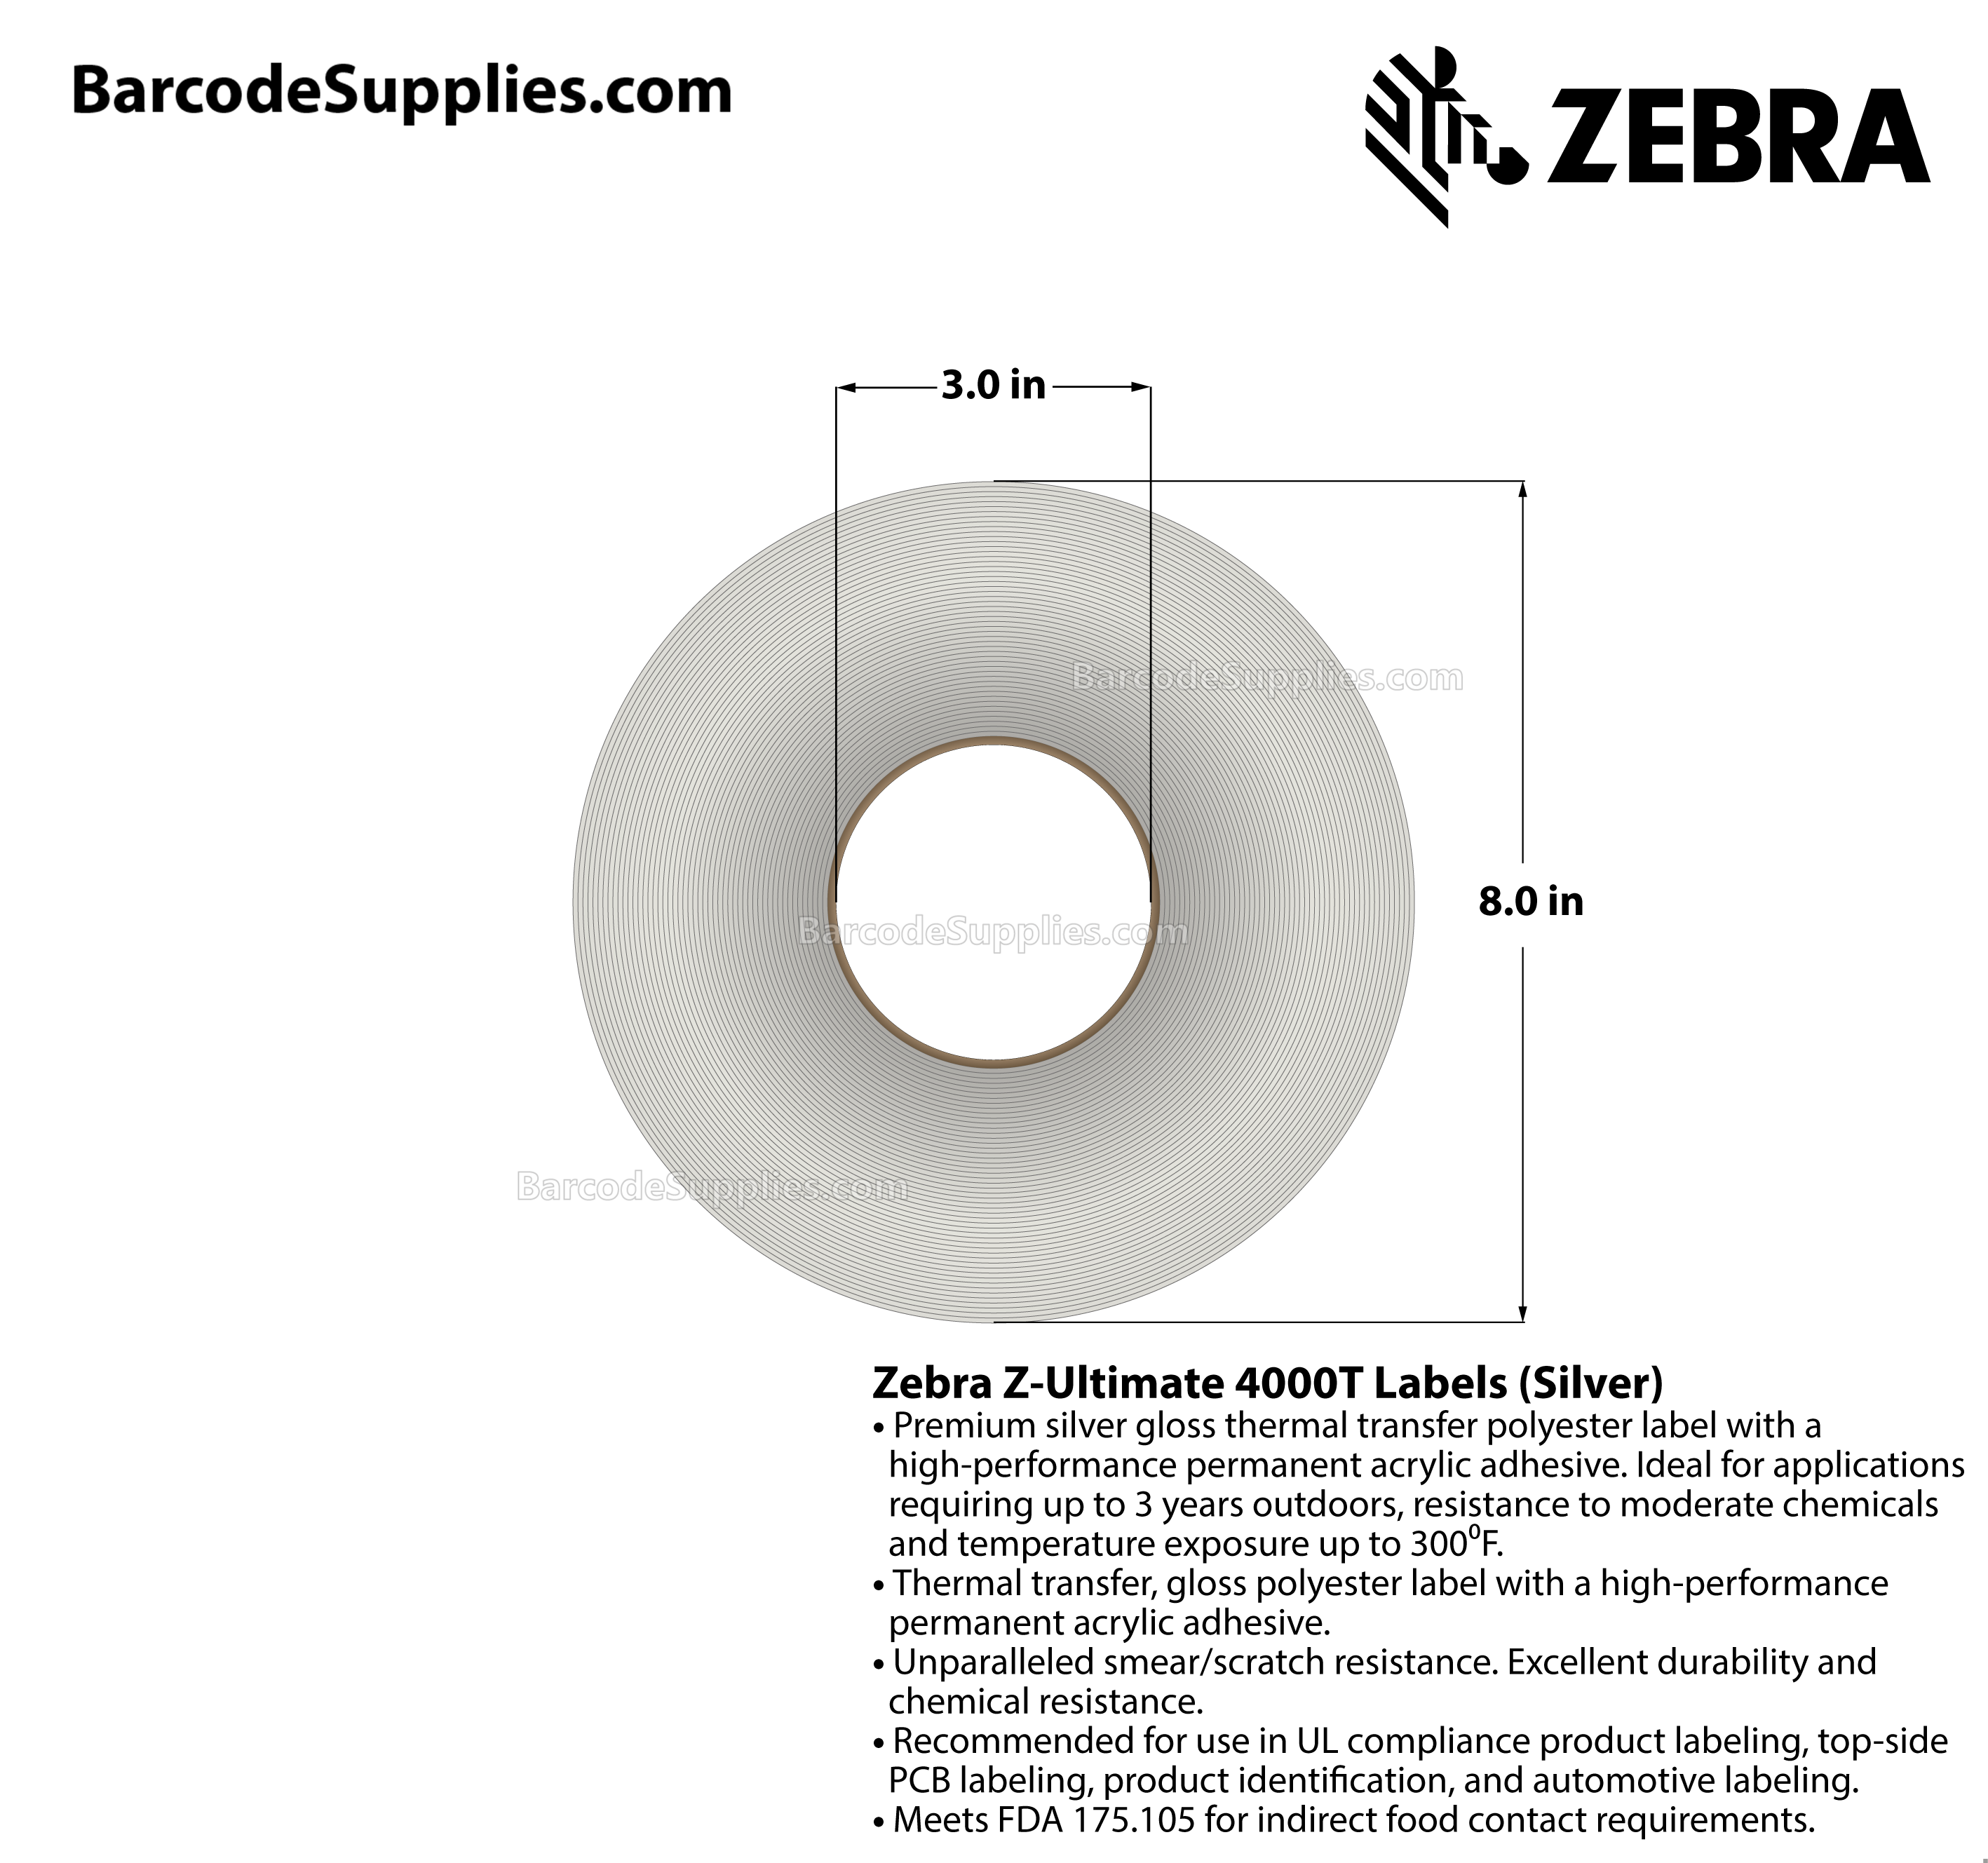 0.75 x 0.25 Thermal Transfer Silver Z-Ultimate 4000T Silver (4-Across) Labels With Permanent Adhesive - Perforated - 10000 Labels Per Roll - Carton Of 1 Rolls - 10000 Labels Total - MPN: 10023152